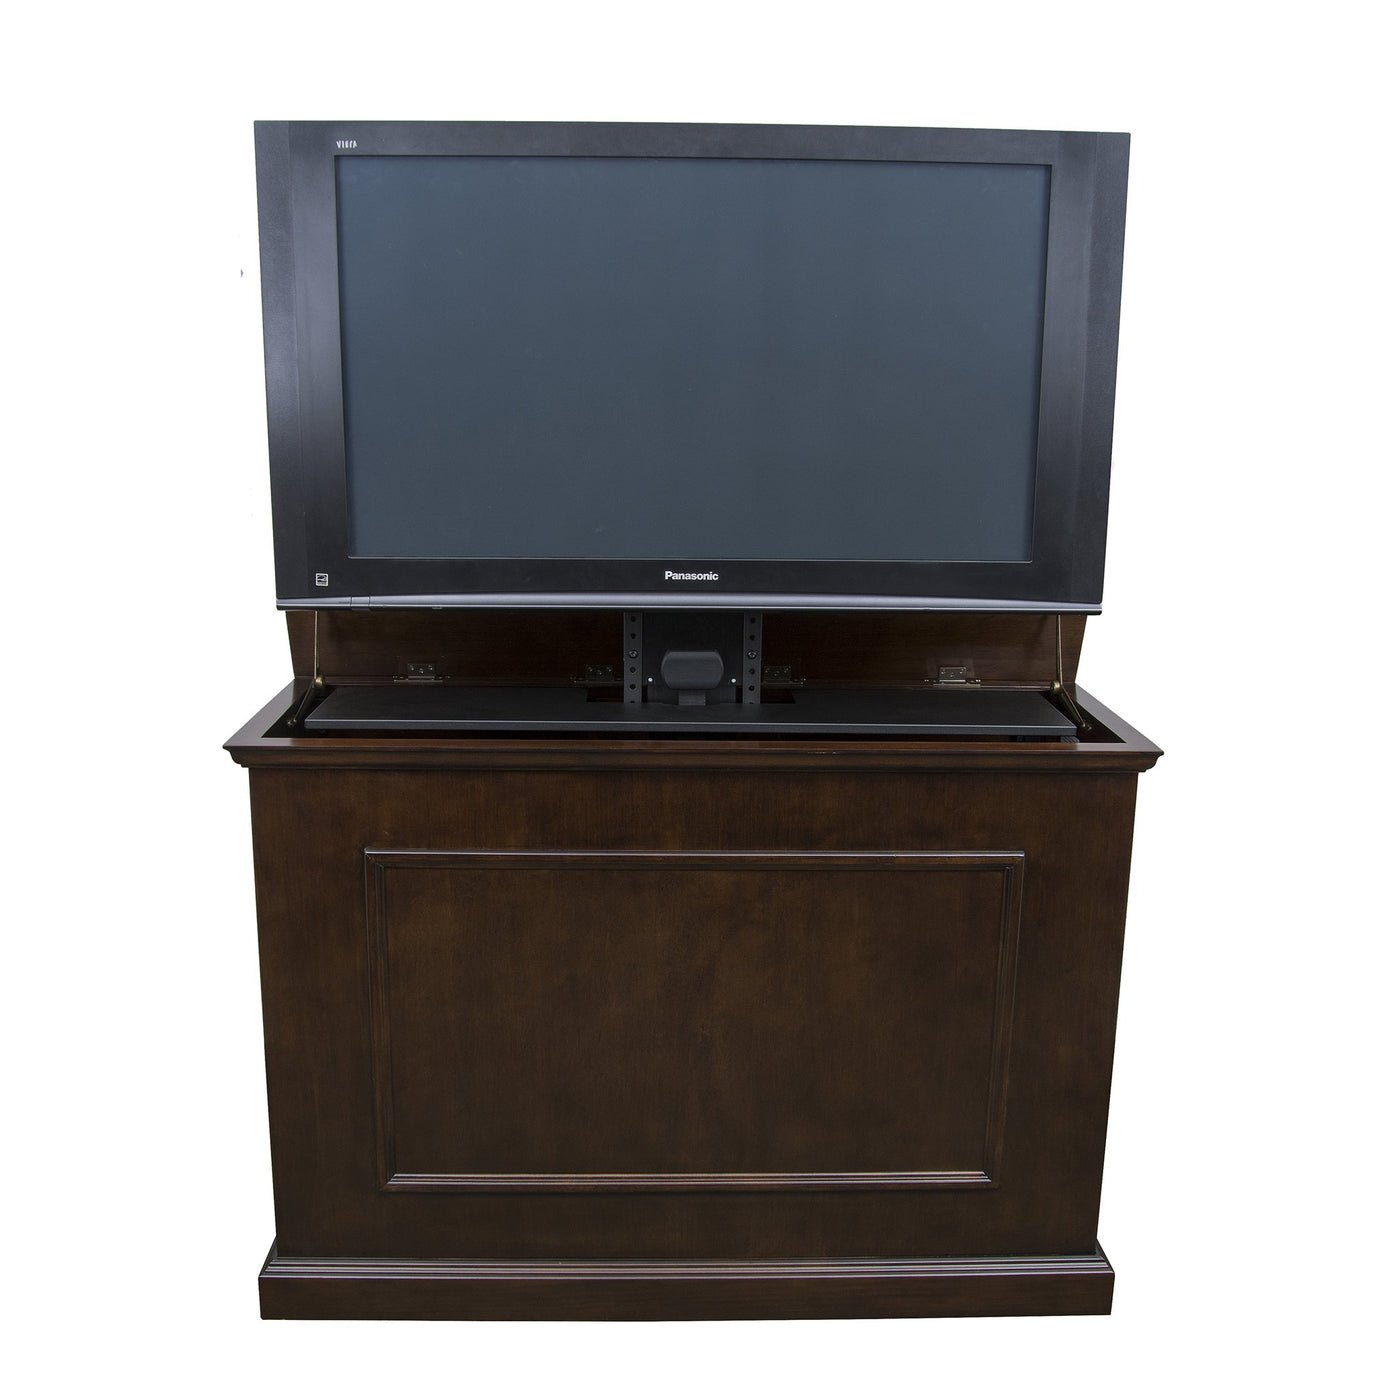 Touchstone The Elevate 72008 Espresso TV Lift Cabinet for 50" Flat screen TVs - TS-72008 - Avanquil